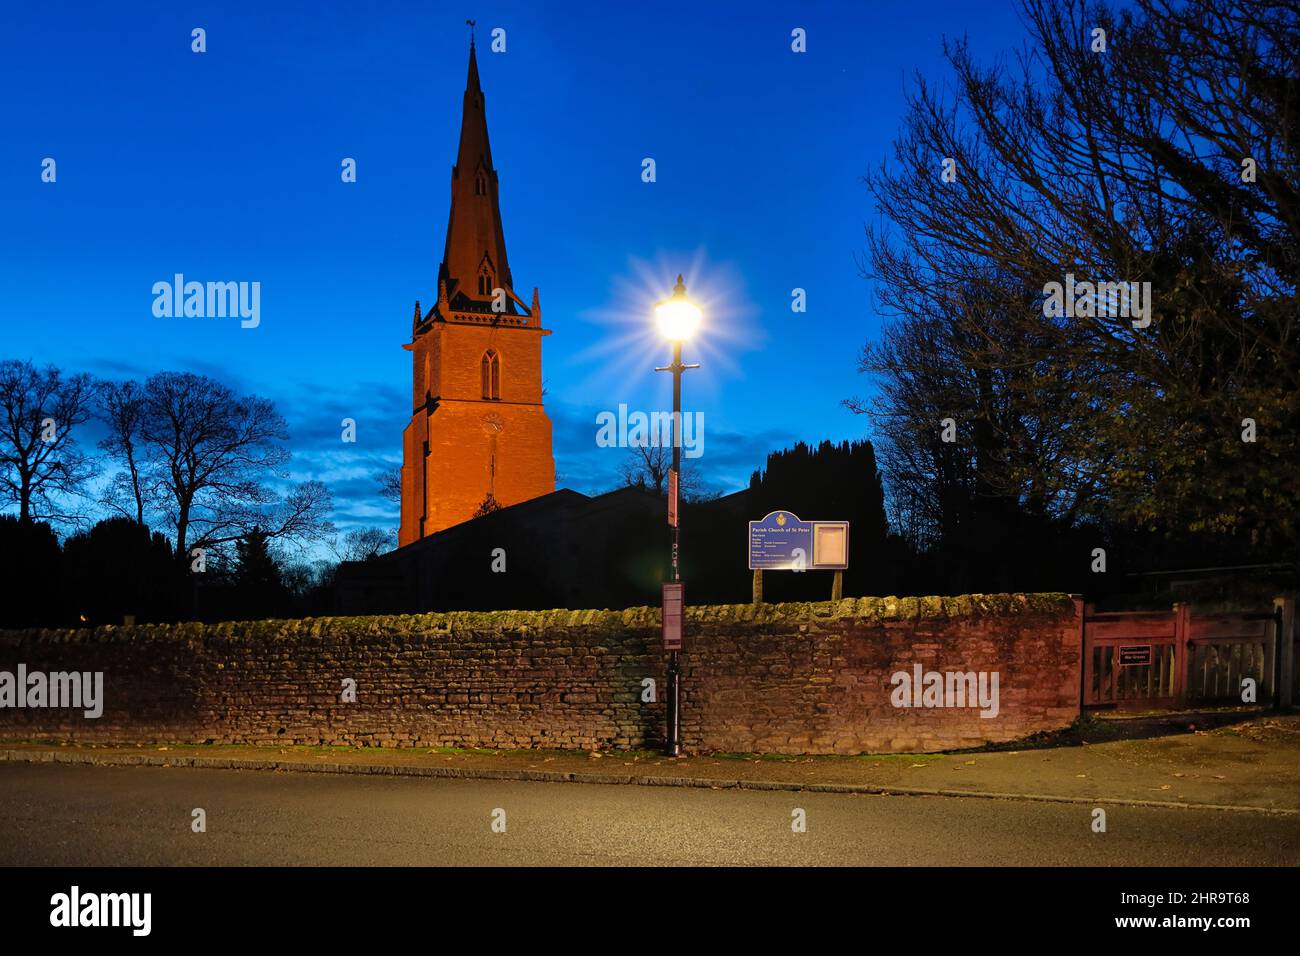 St Peter's Church, Sharnbrook, Bedfordshire, UK - Street lamp and parish church tower lit up at night Stock Photo